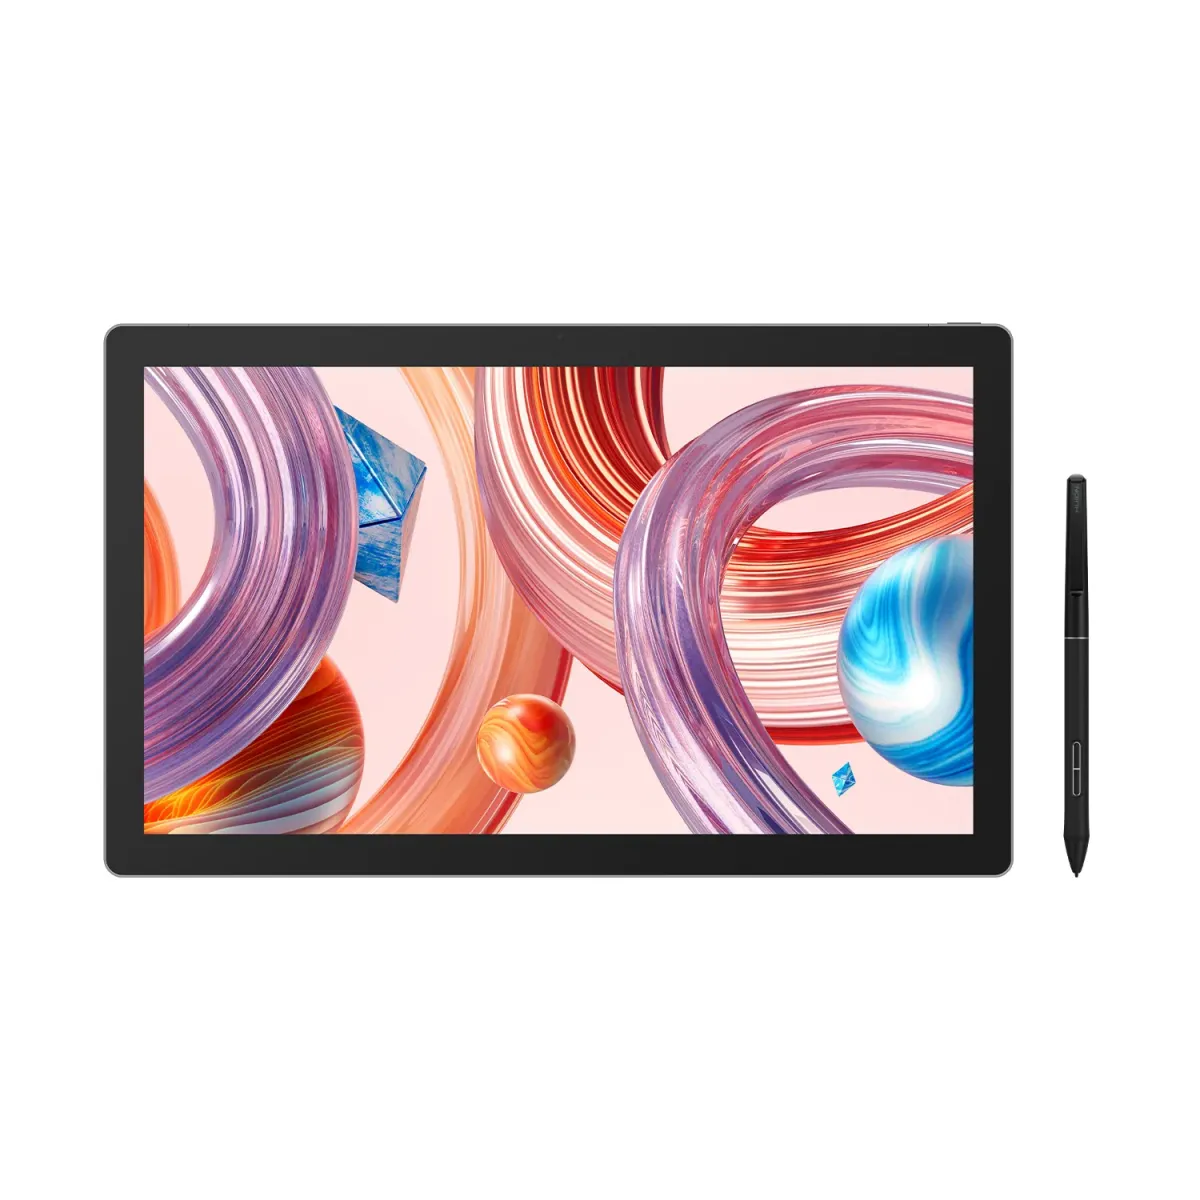 Huion Kamvas Studio 16 Portable All-in-One Drawing Tablet for 